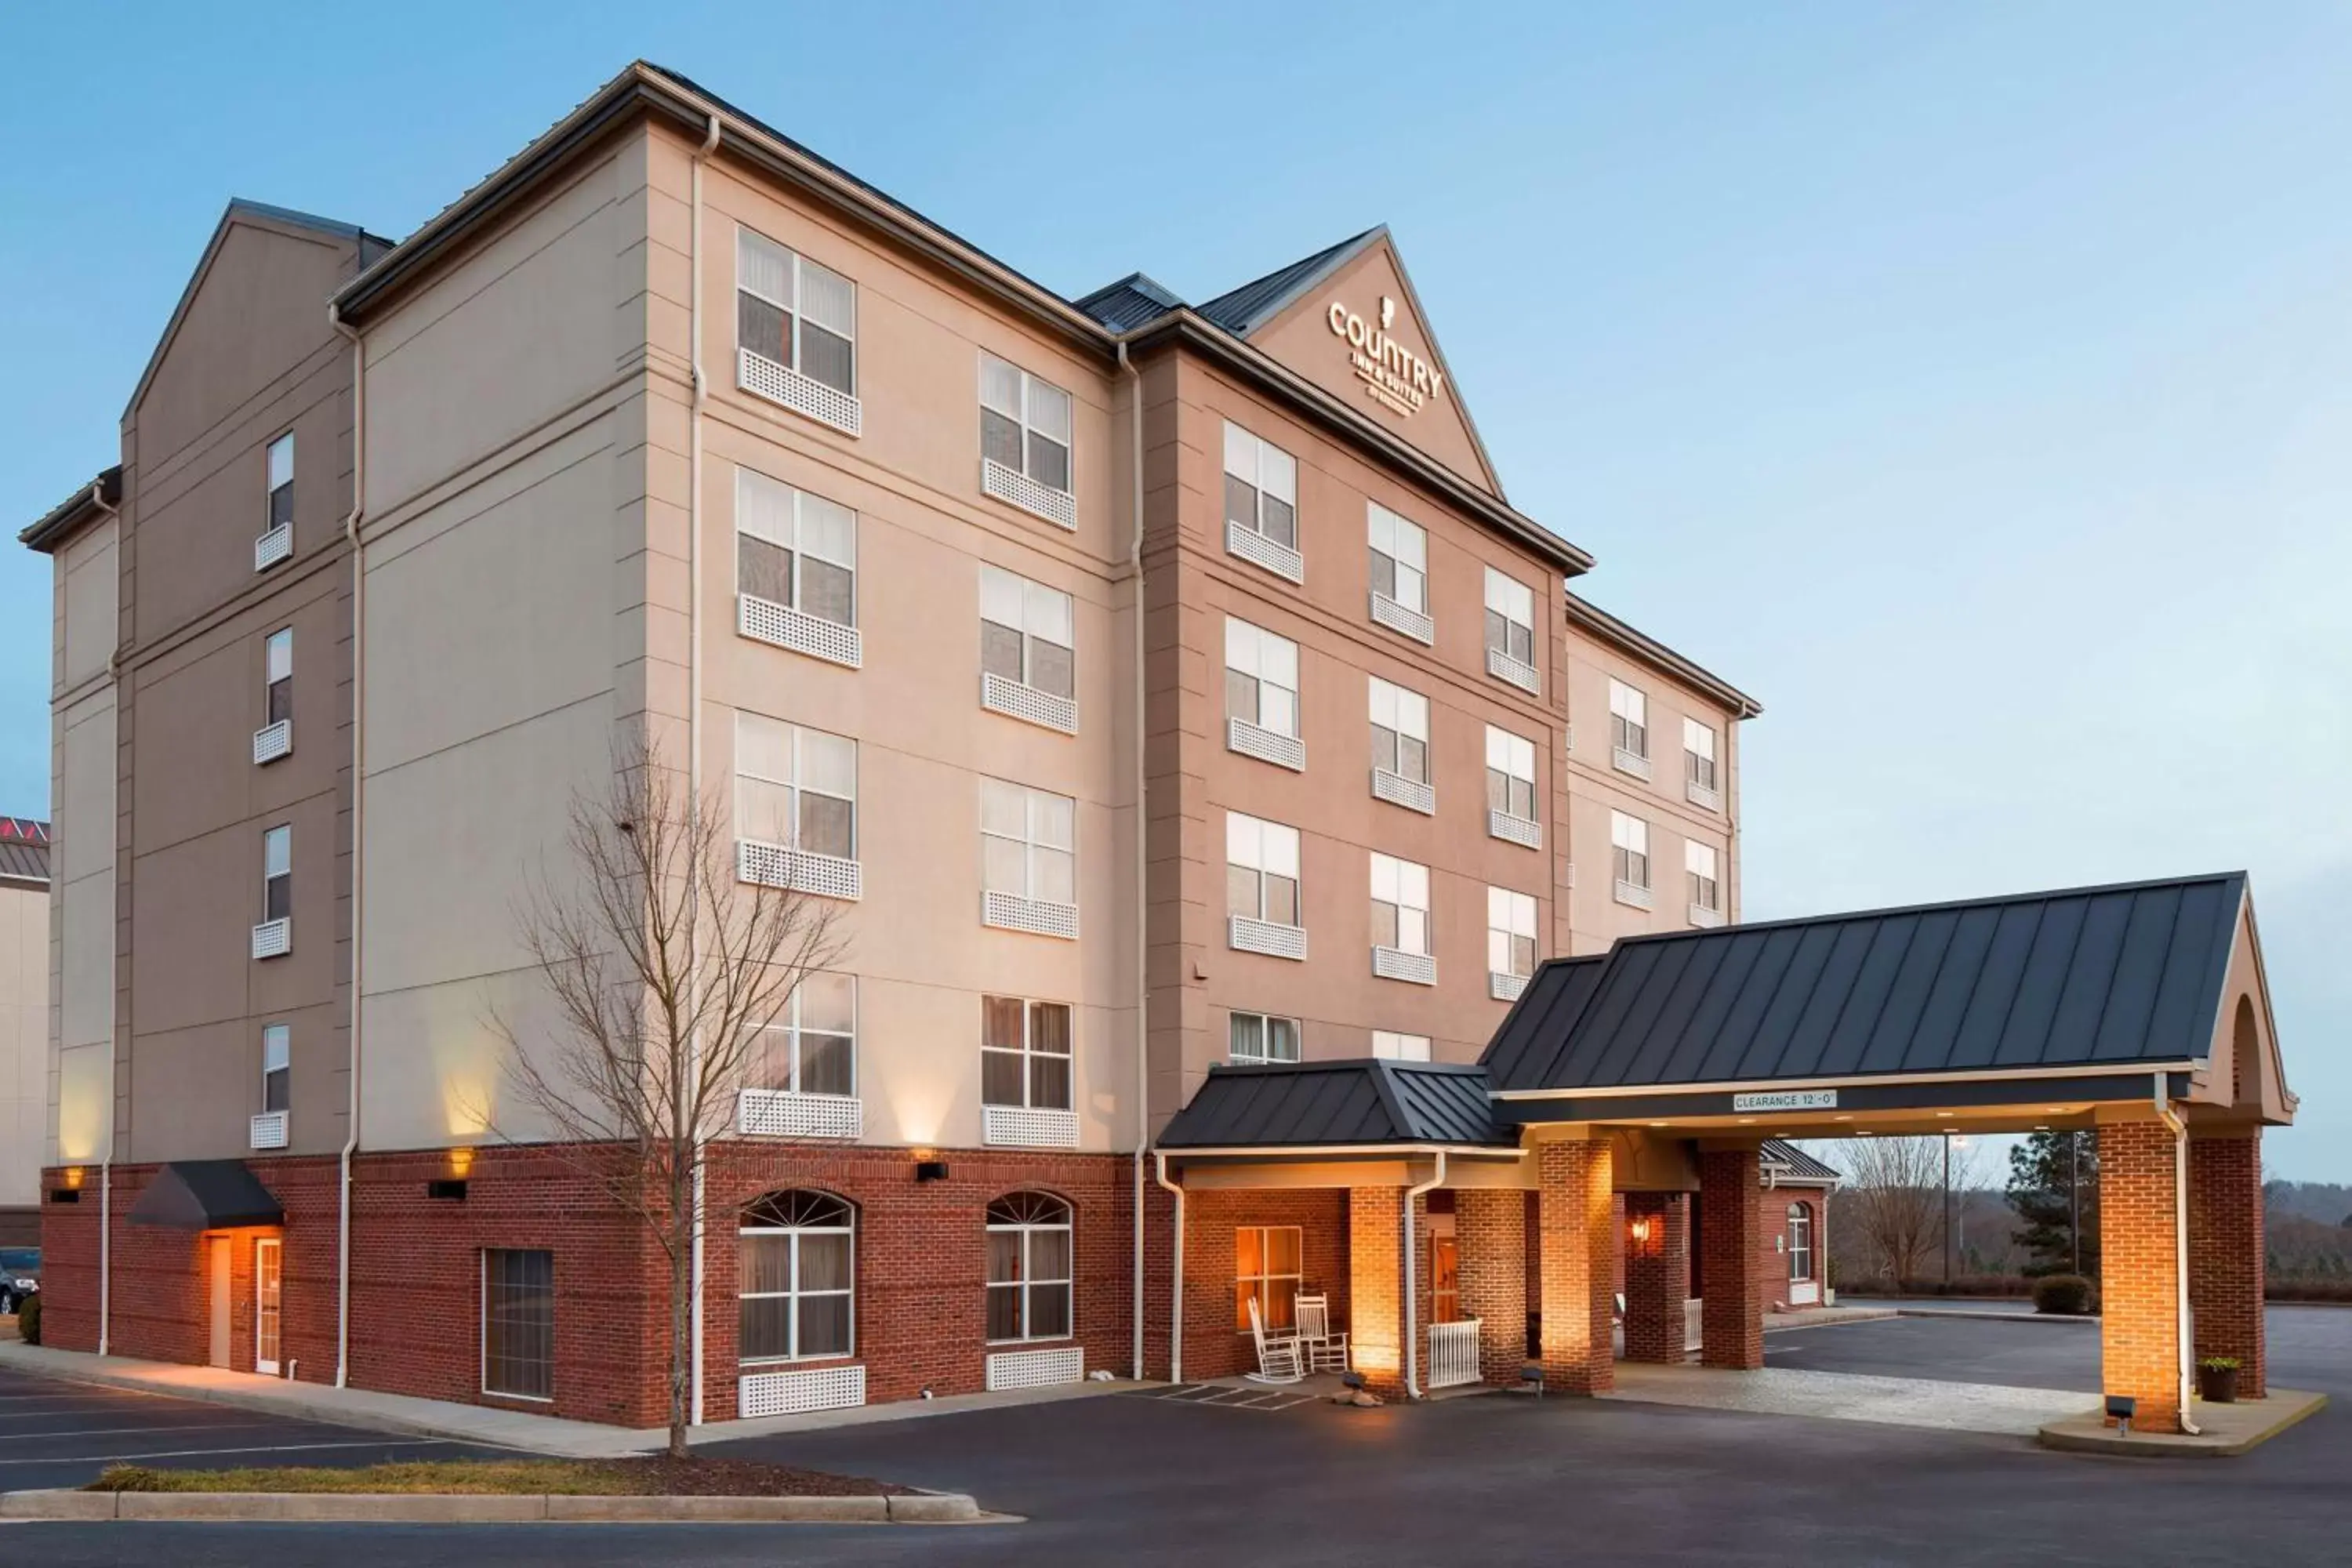 Property building in Country Inn & Suites by Radisson, Anderson, SC